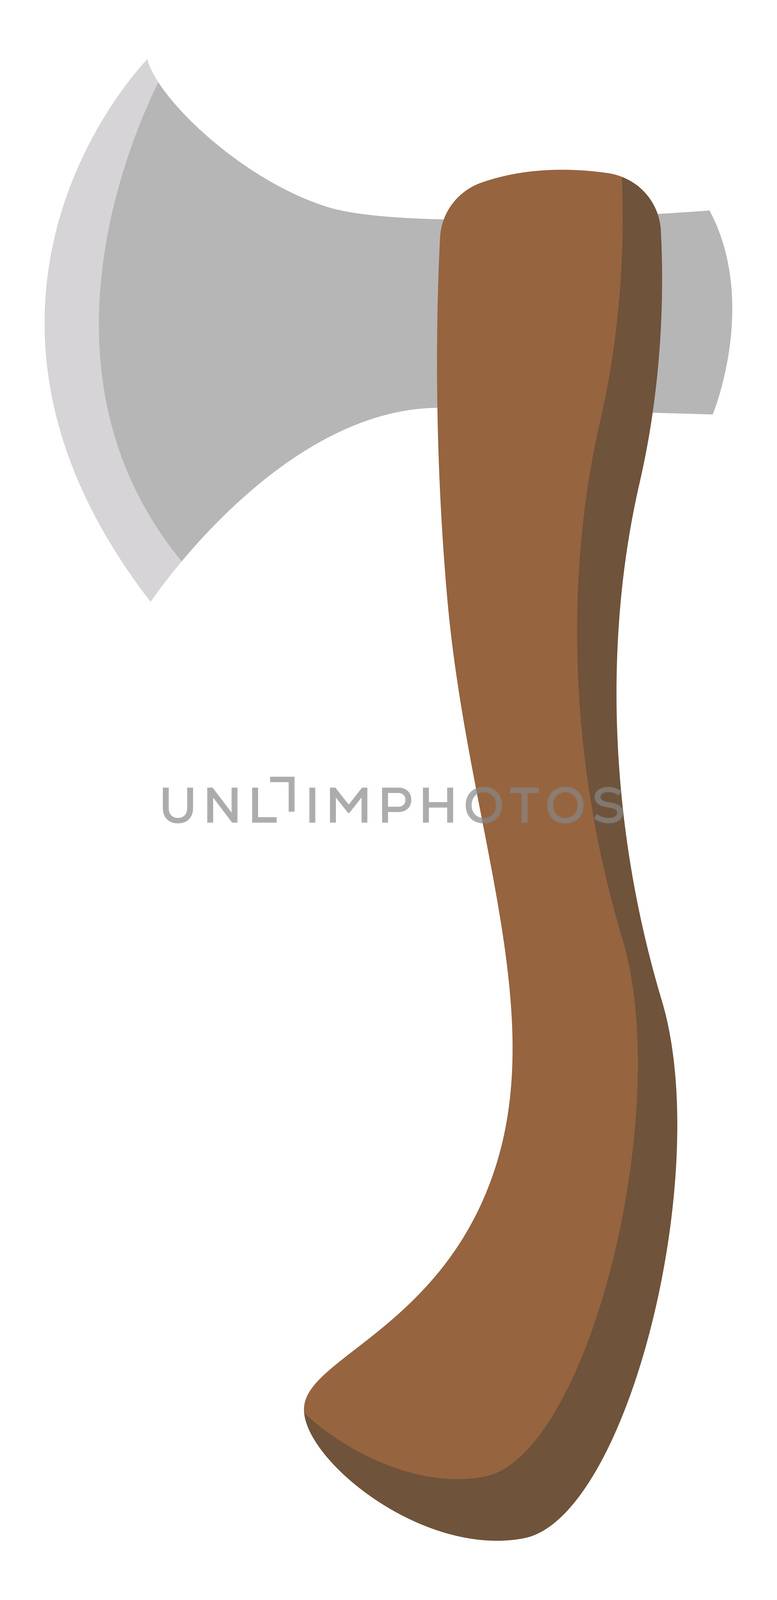 Brown ax, illustration, vector on white background